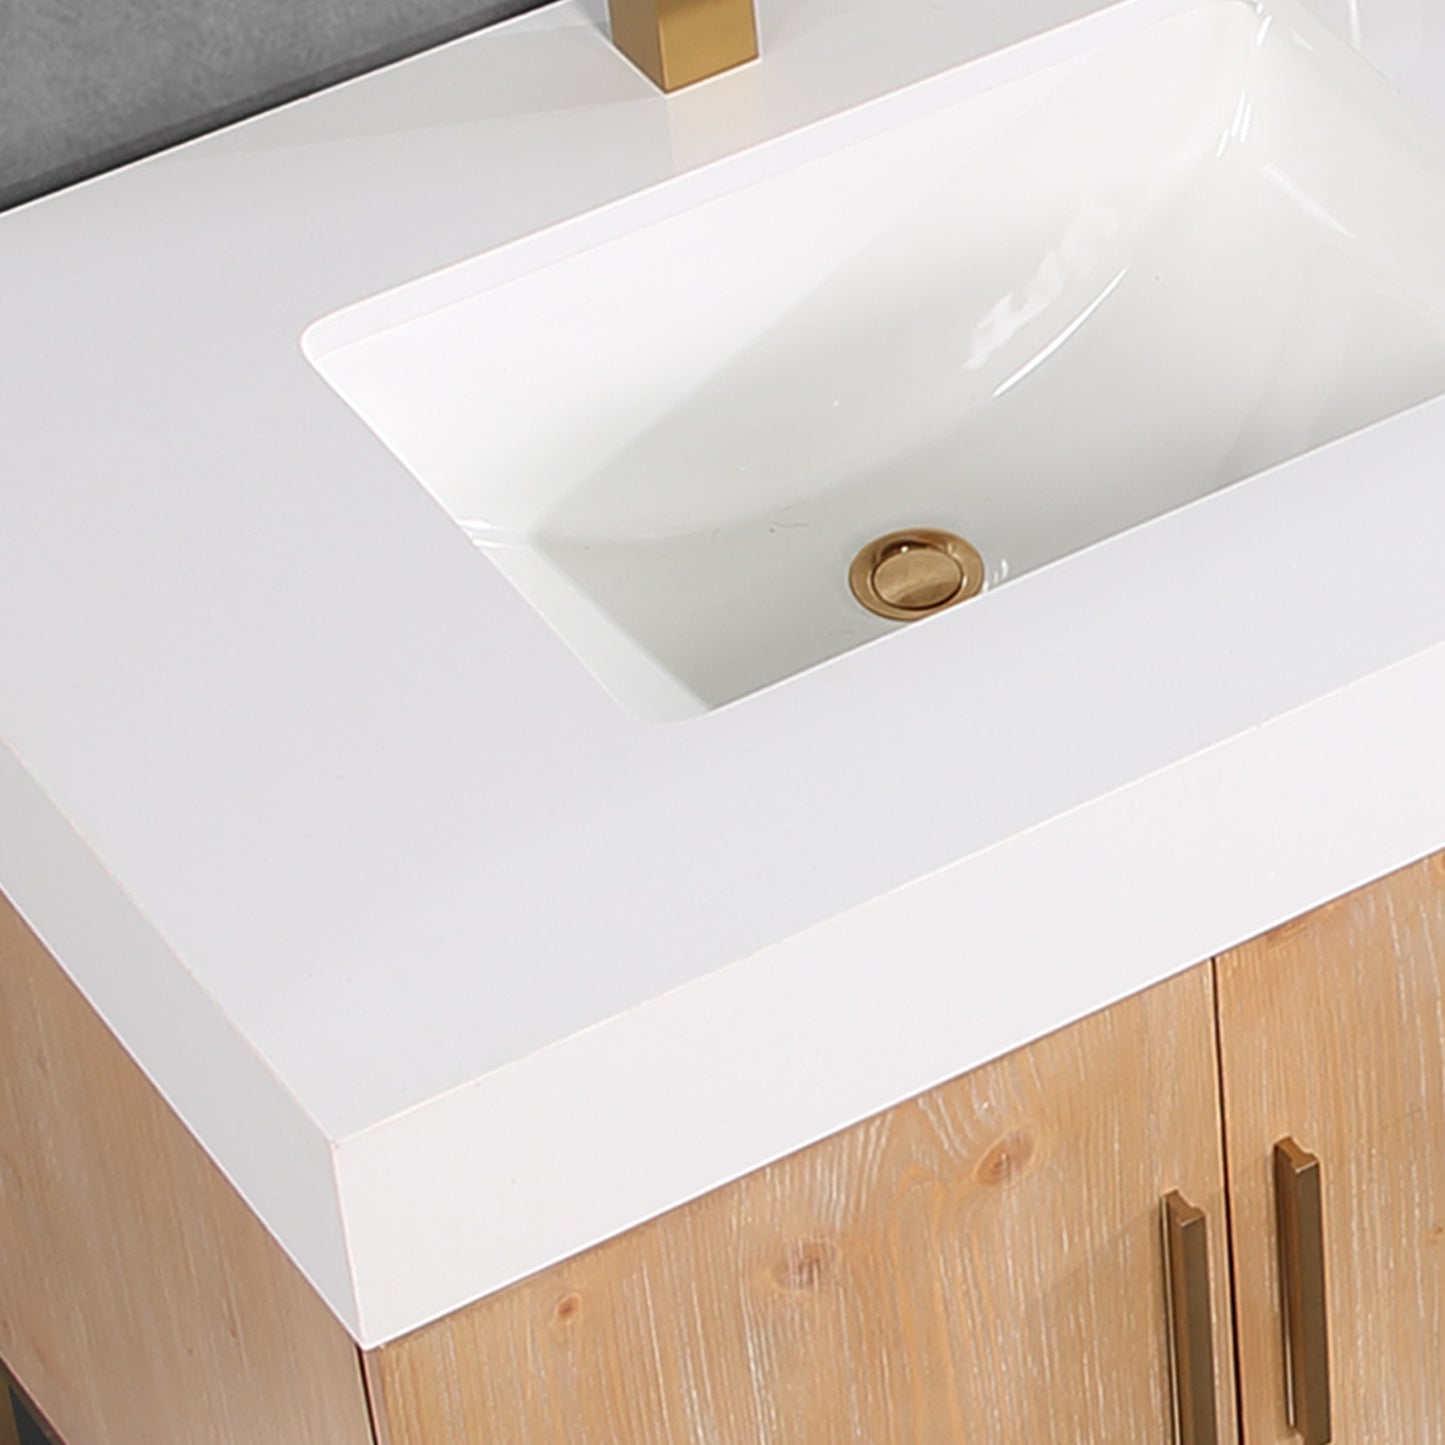 Bianco 72" Double Bathroom Vanity in Light Brown and White Composite Stone Countertop without Mirror